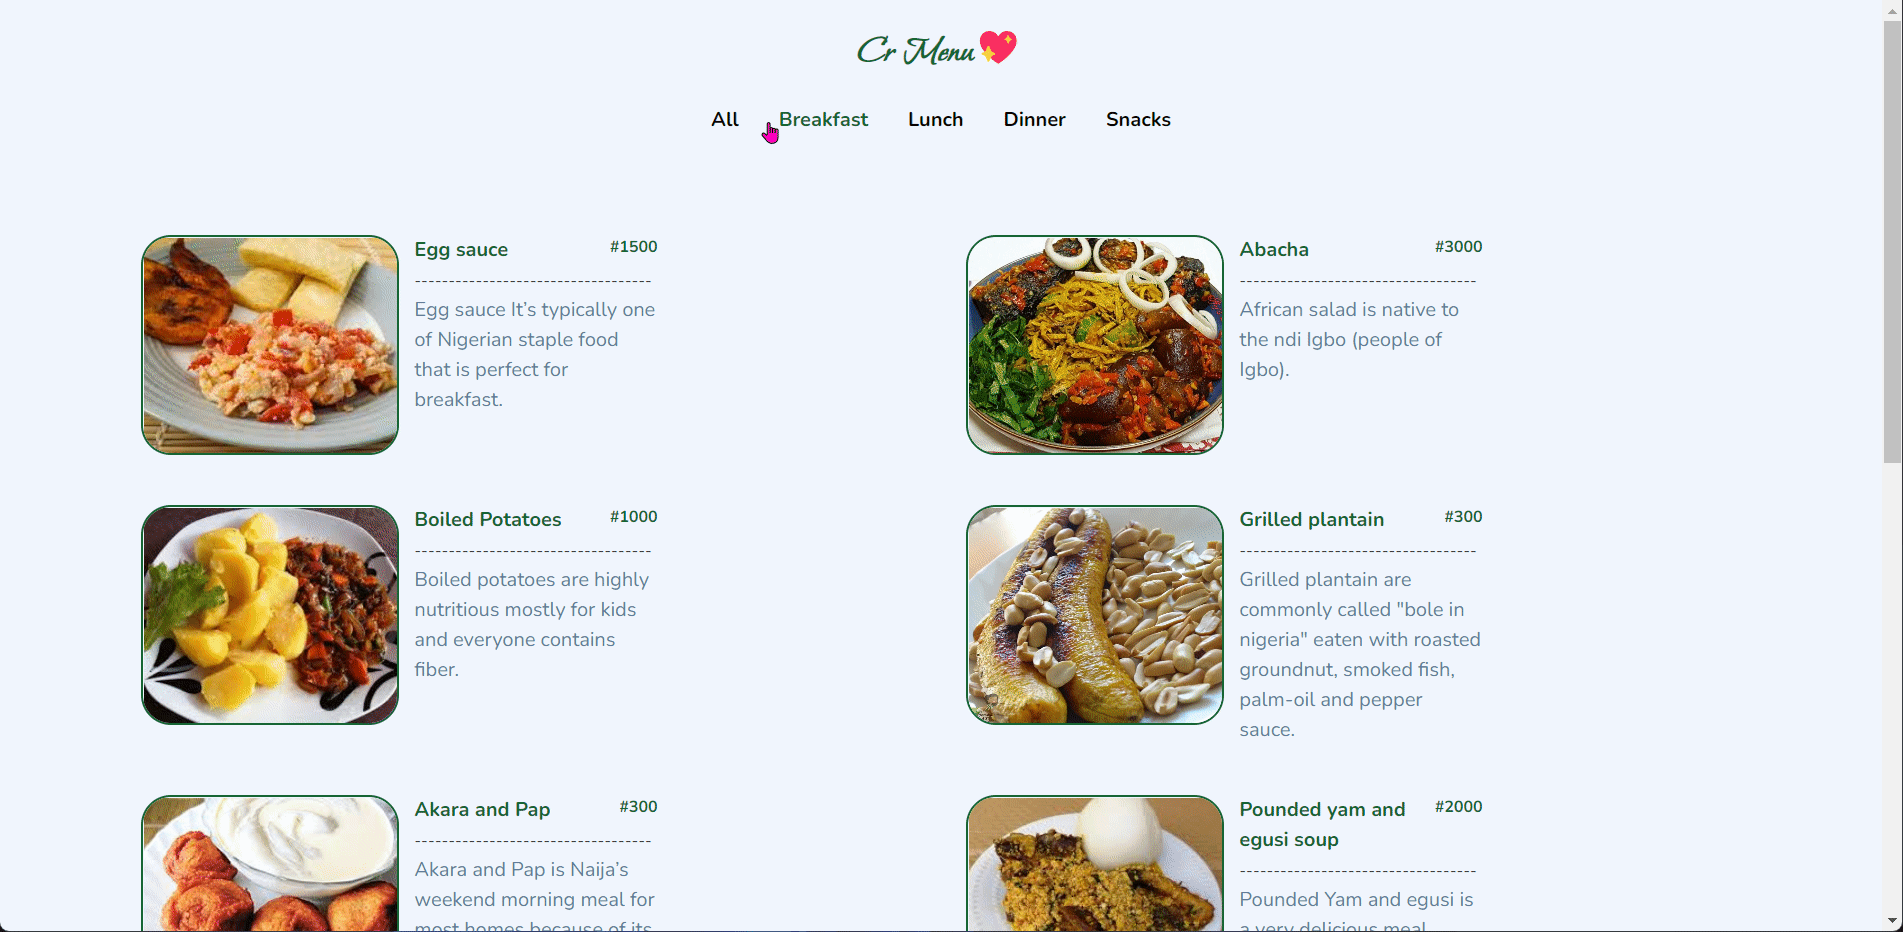 A webpage displaying the meals based on categories